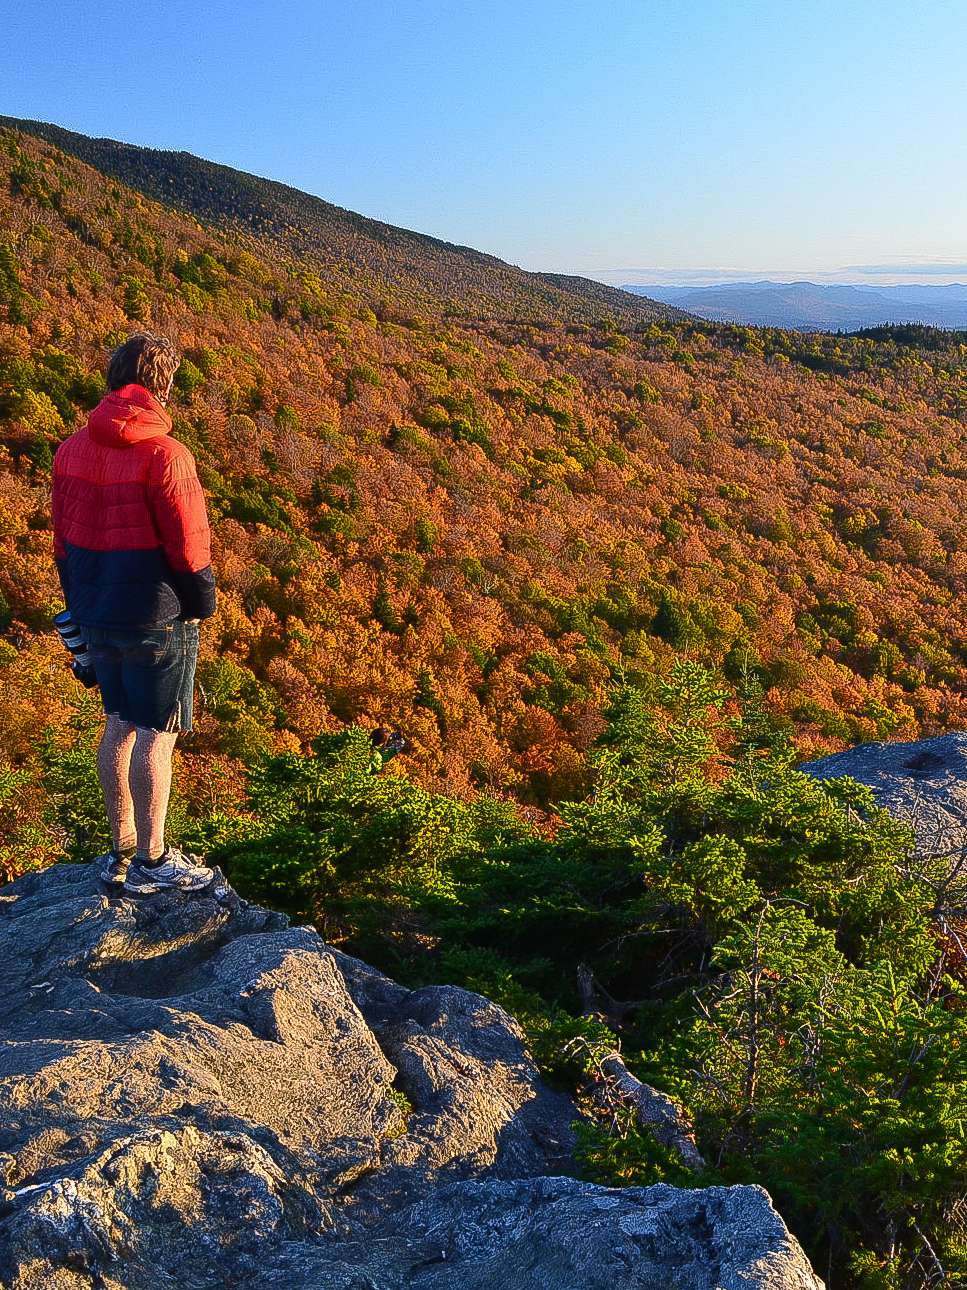 A hiker standing at a sweeping overlook